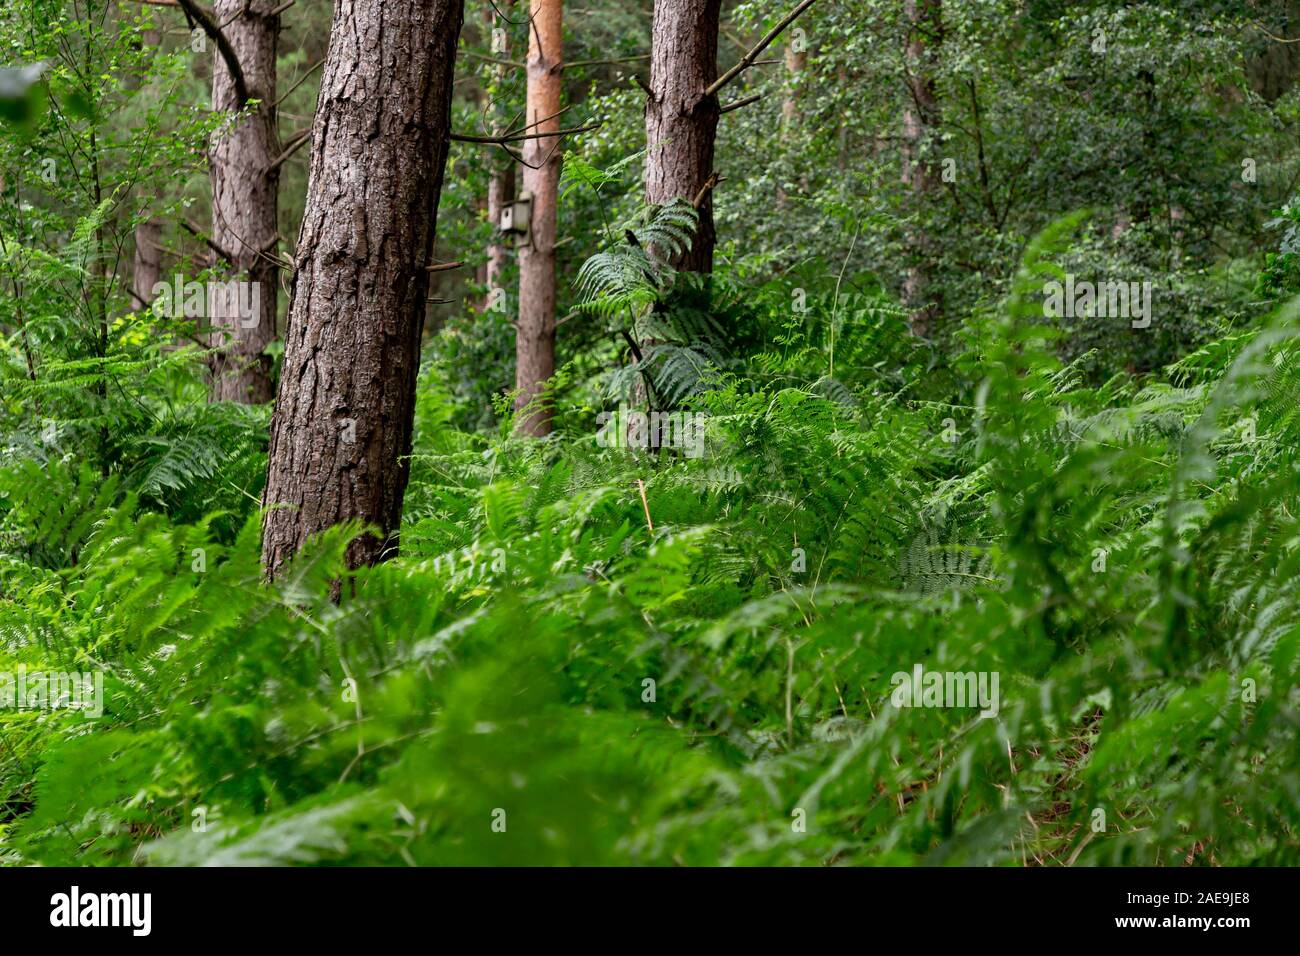 Ferns, moving with the wind at Daresbury Firs, against the trunks of static trees Stock Photo